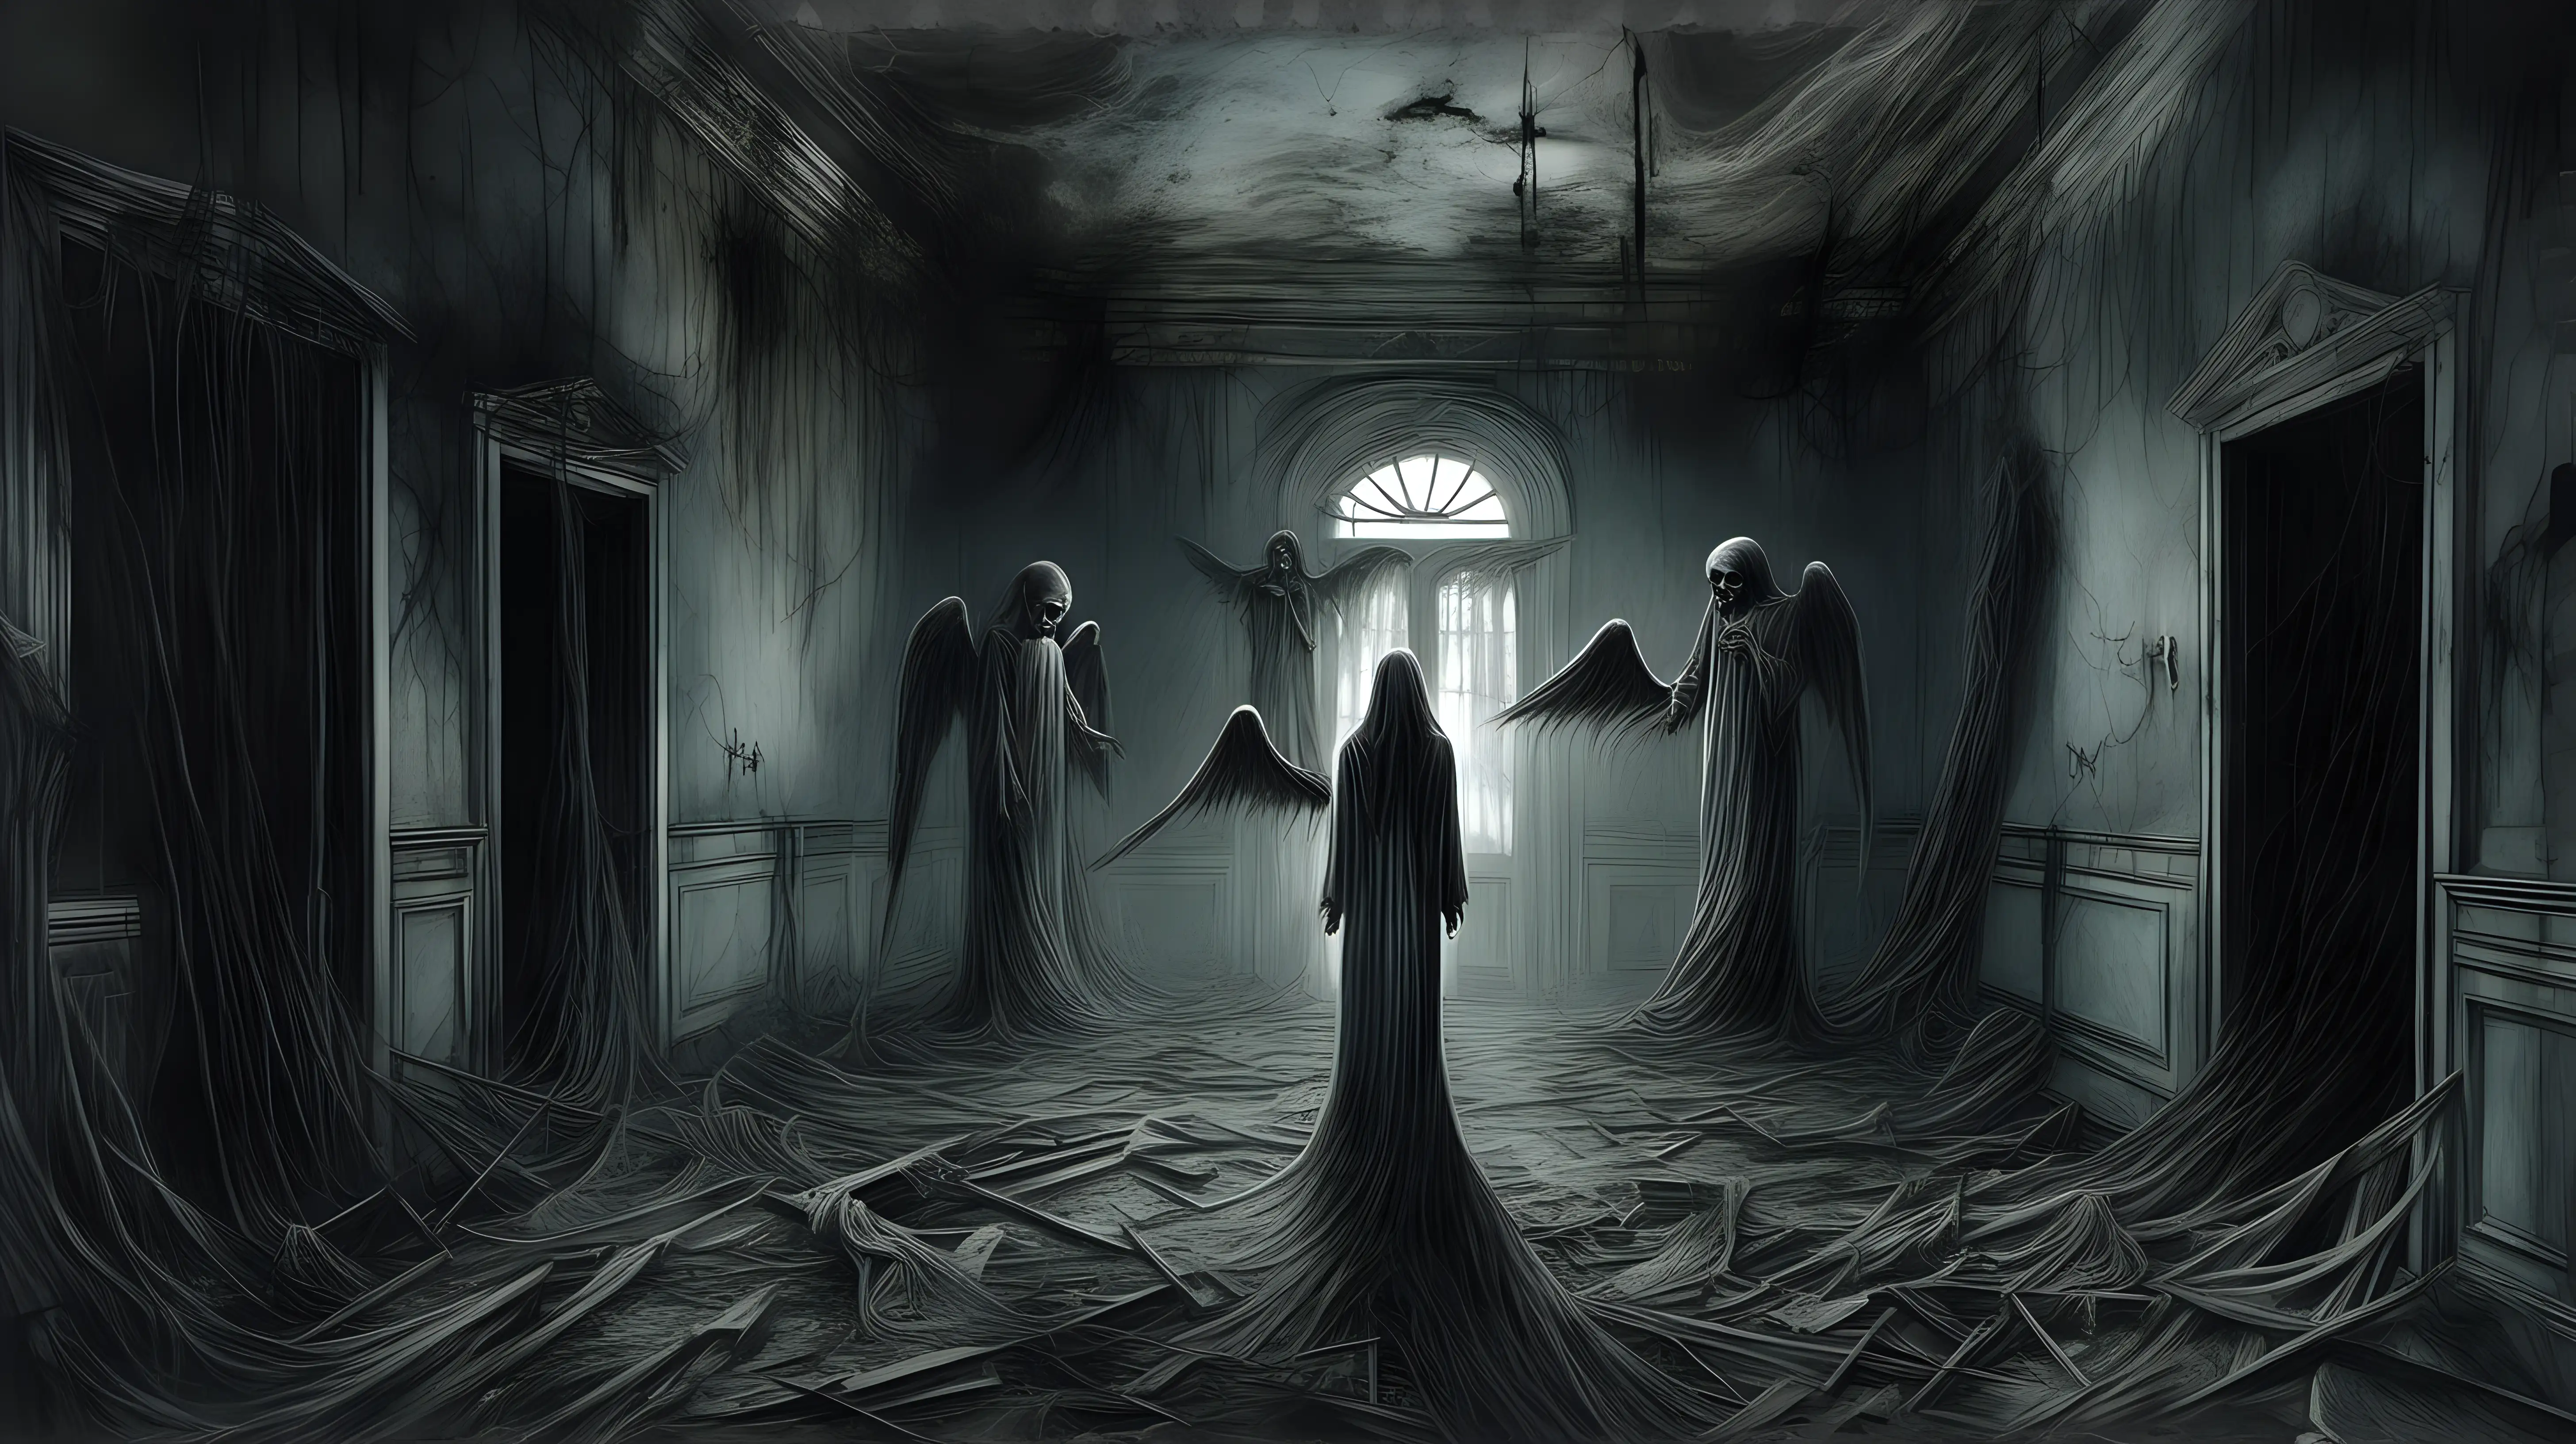 "Illustrate a sorrowful image of the Angel of Death standing in a haunted, dilapidated mansion, with ethereal wisps of lost souls lingering in the decaying hallways."